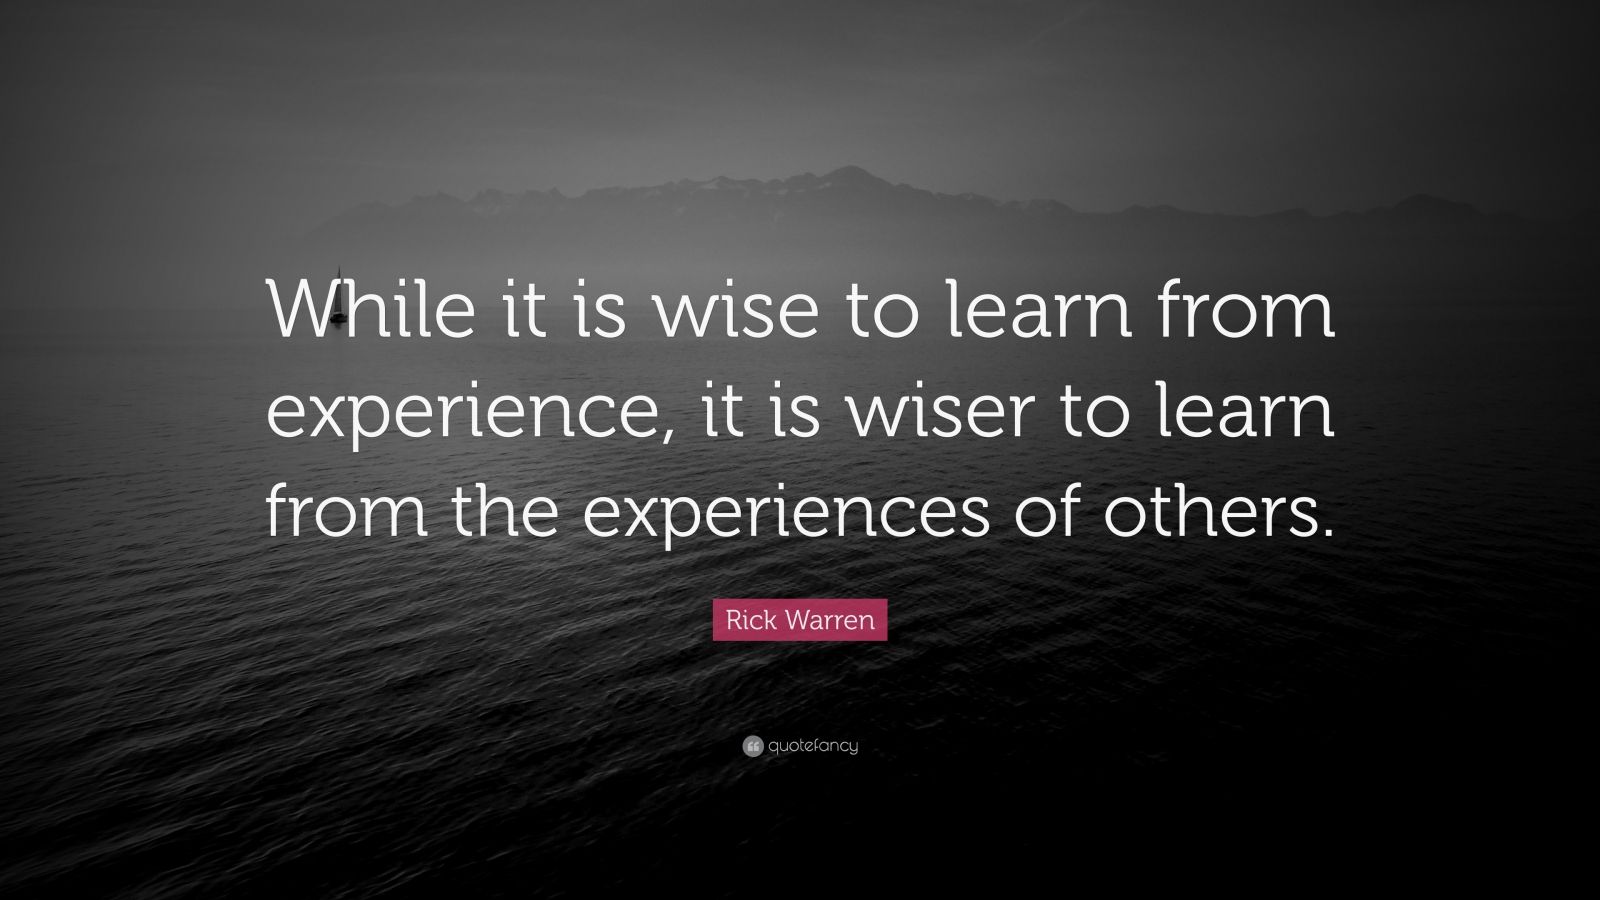 2196129 Rick Warren Quote While it is wise to learn from experience it is